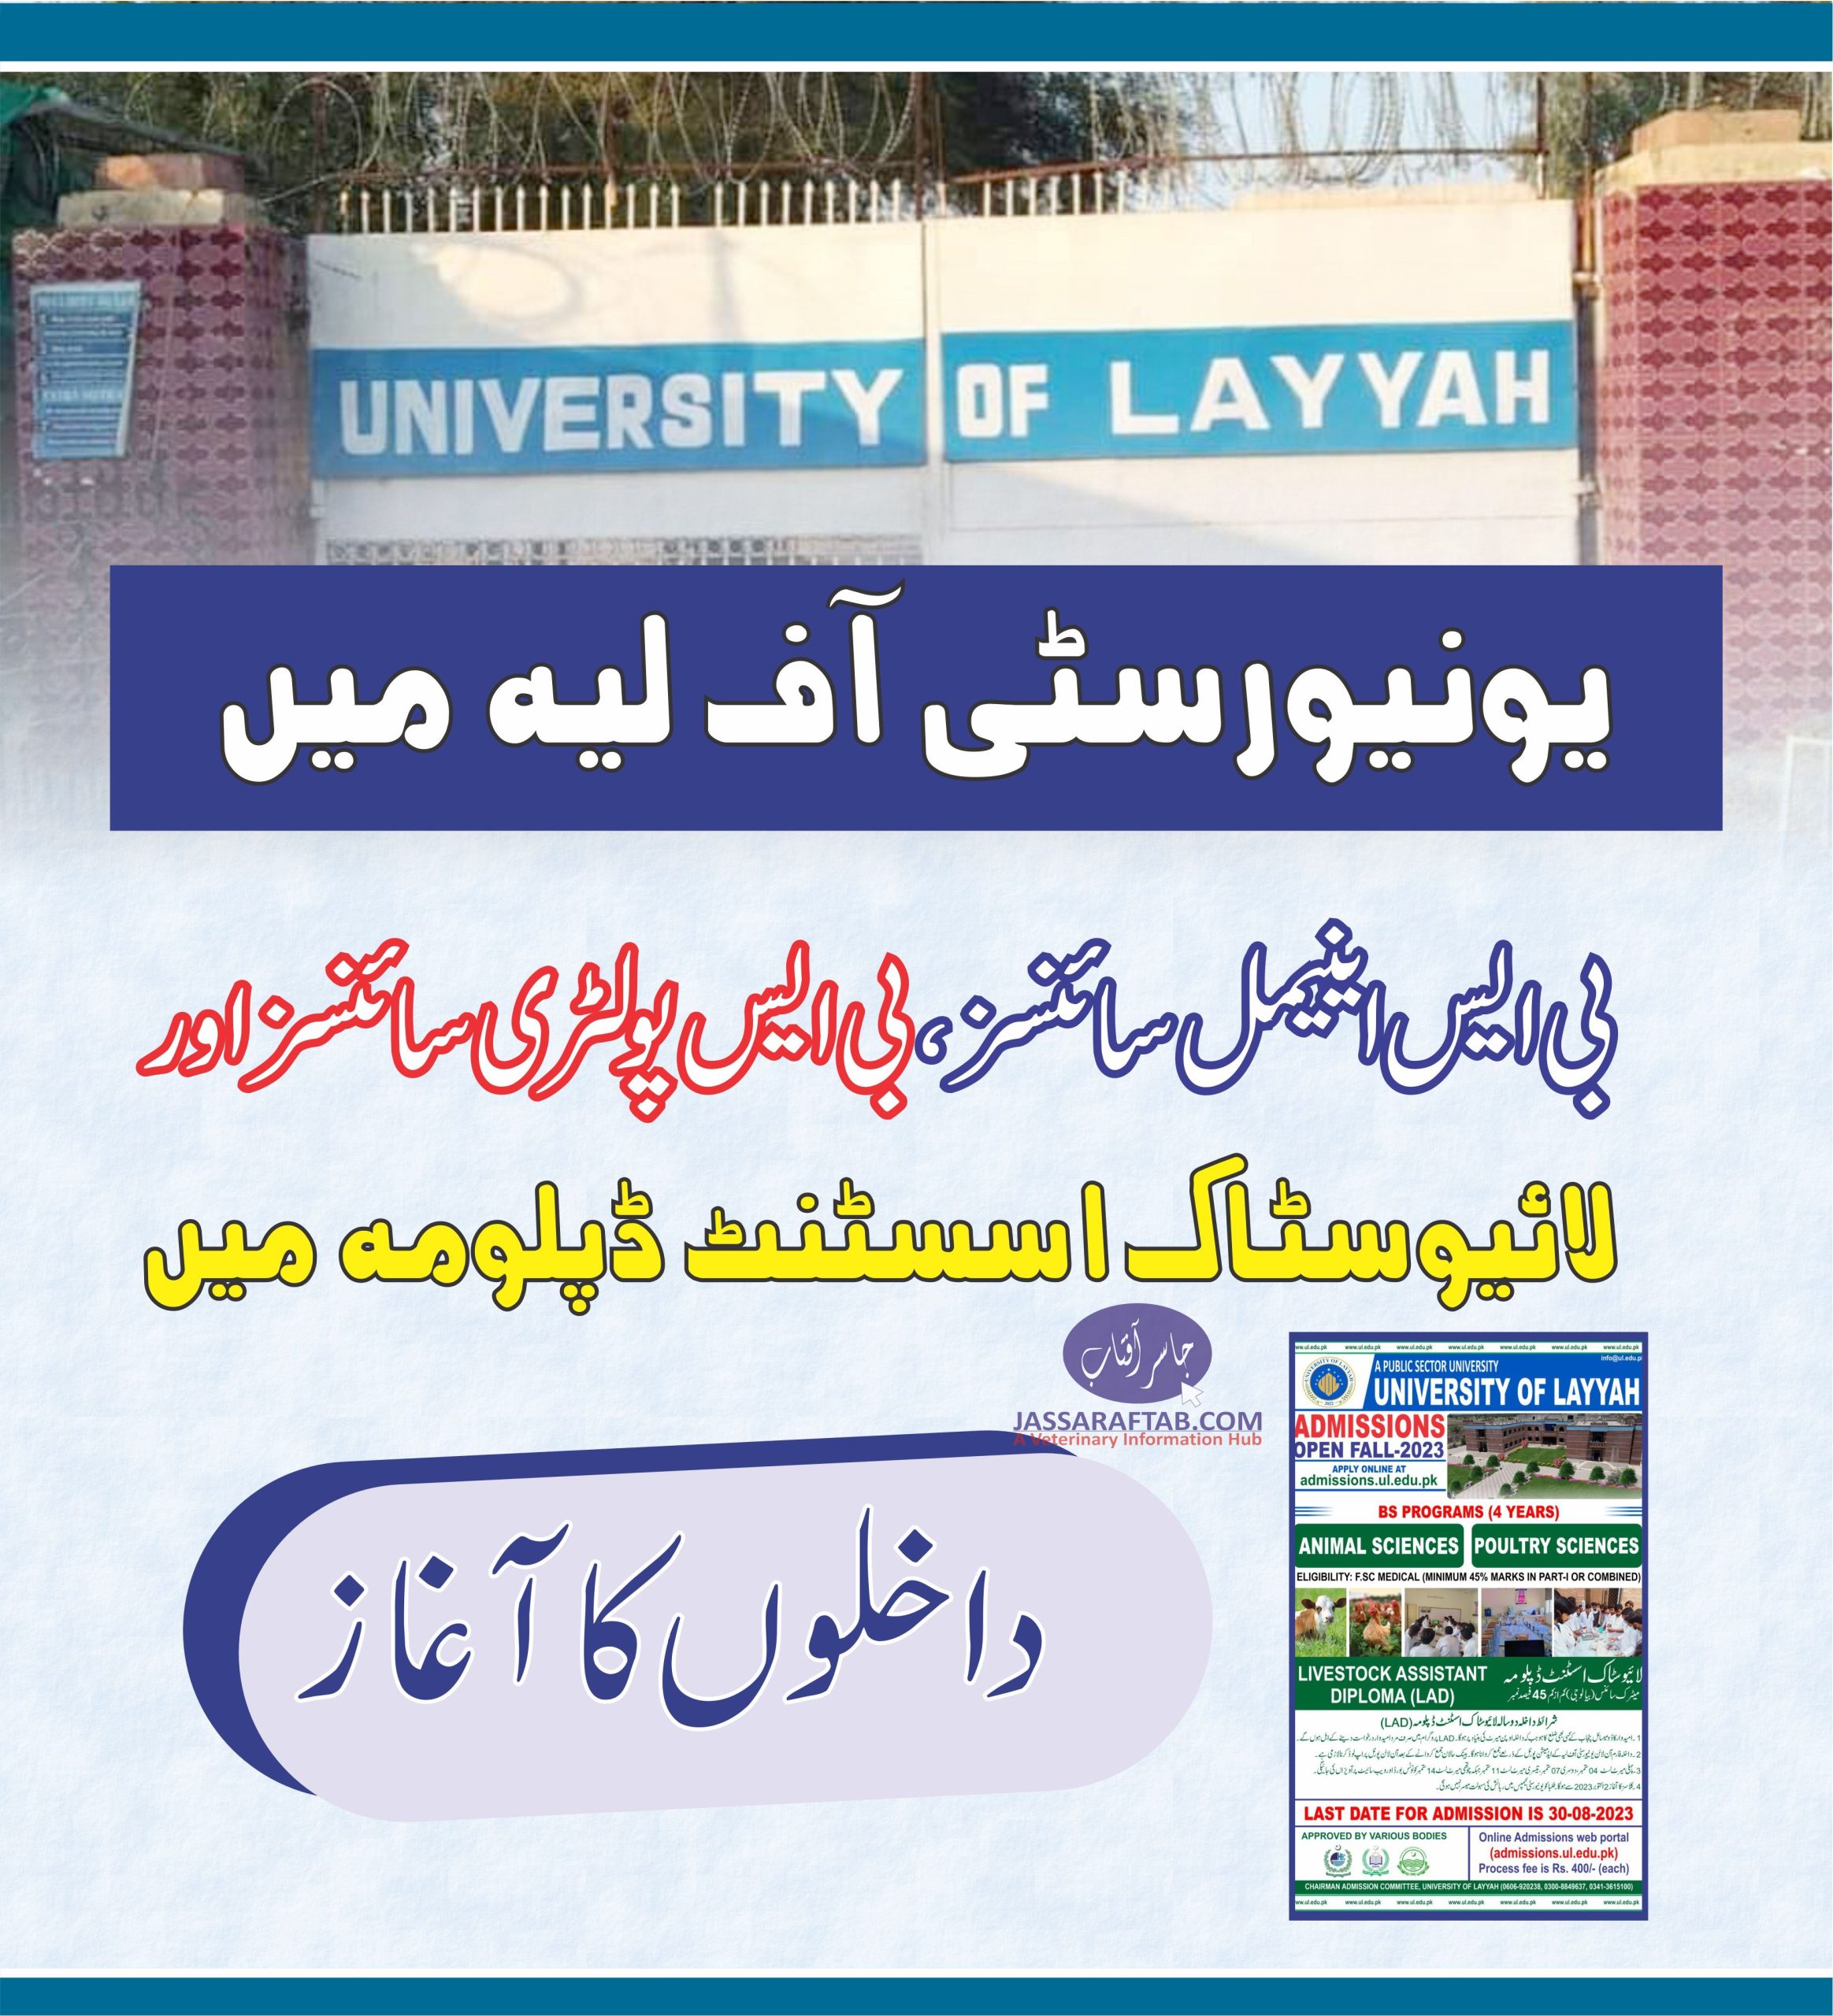 Admissions in University of Layyah